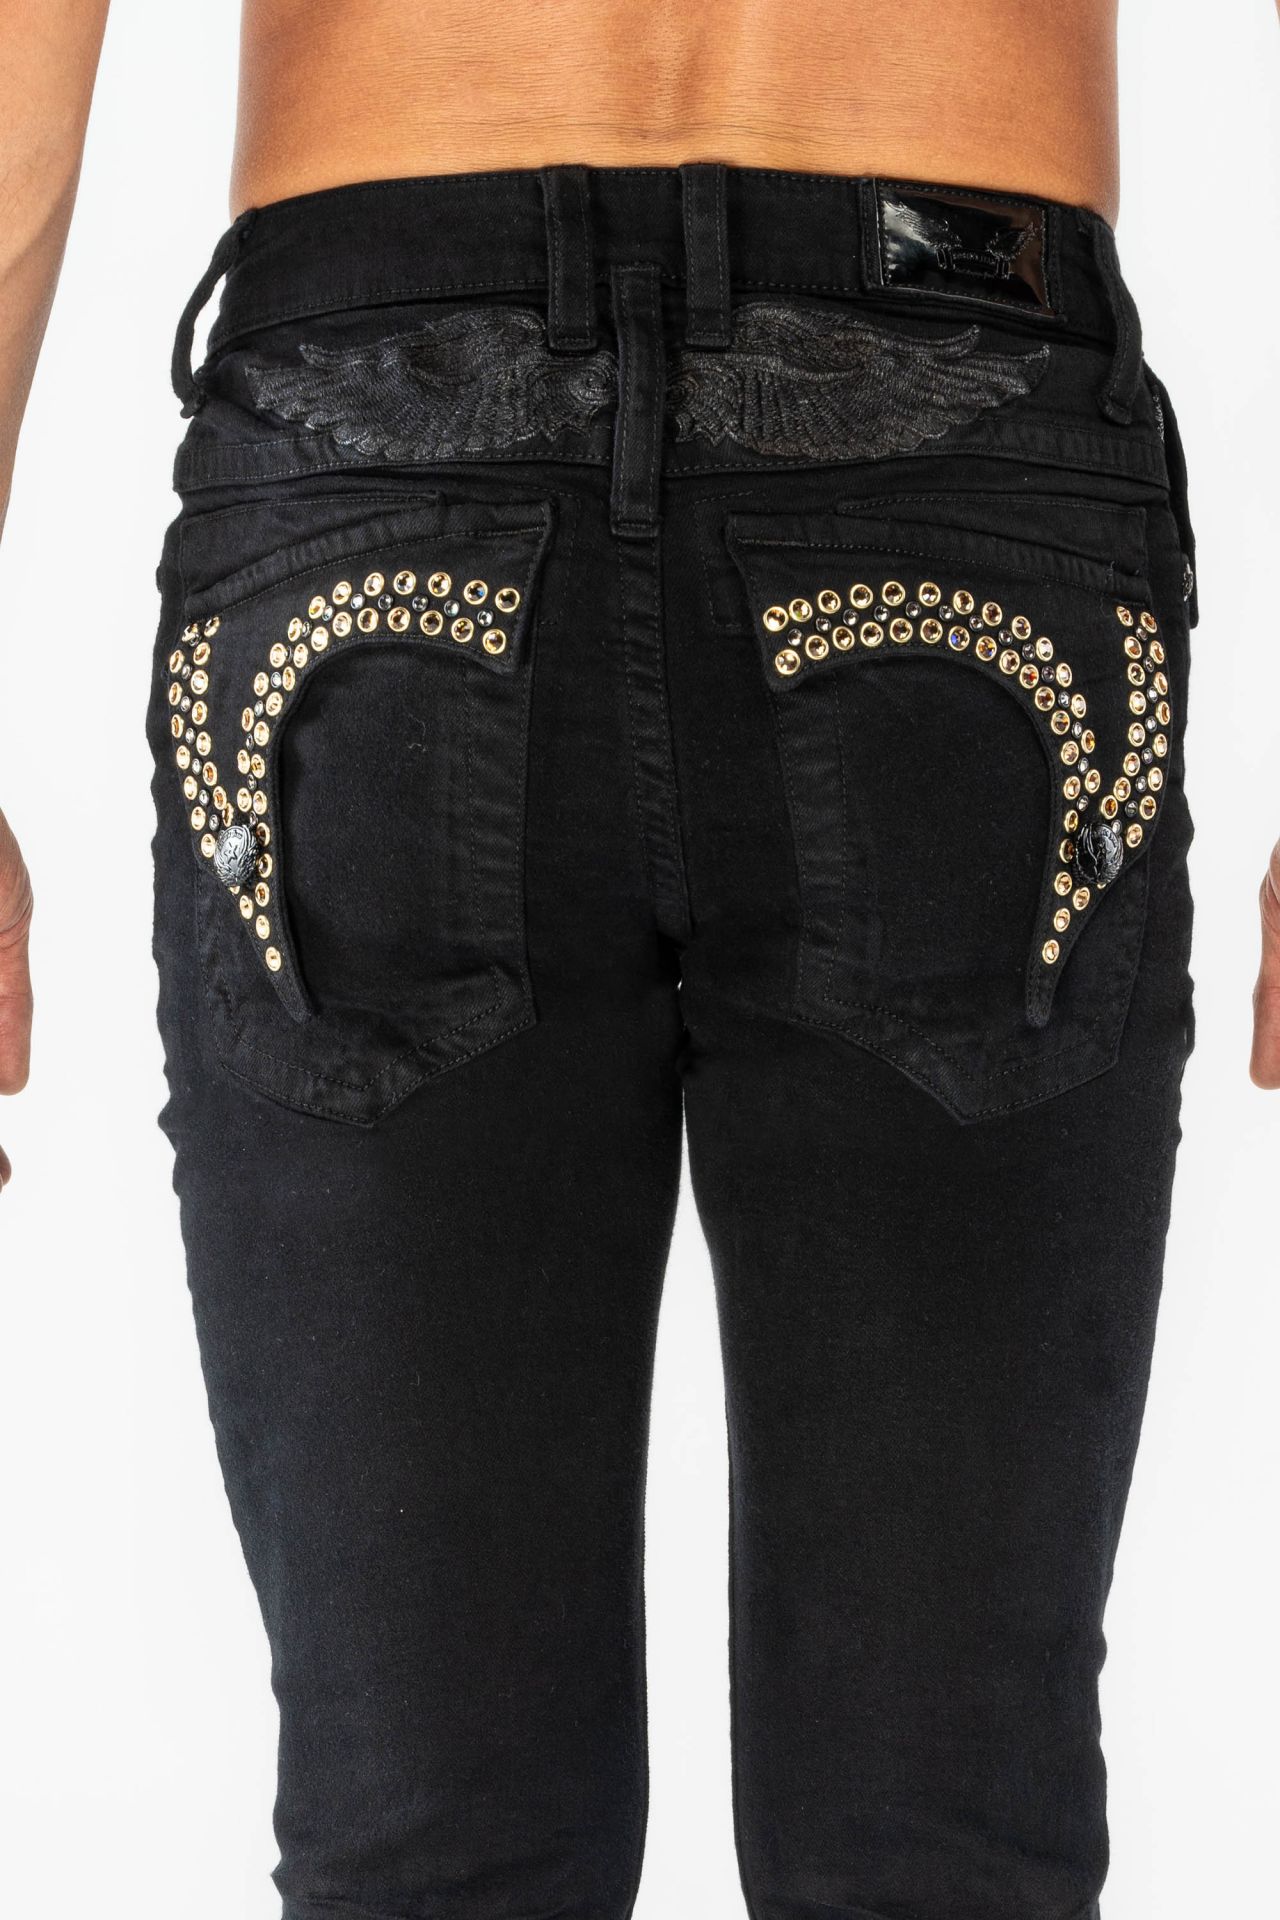 Black Skinny Jeans with Crystals